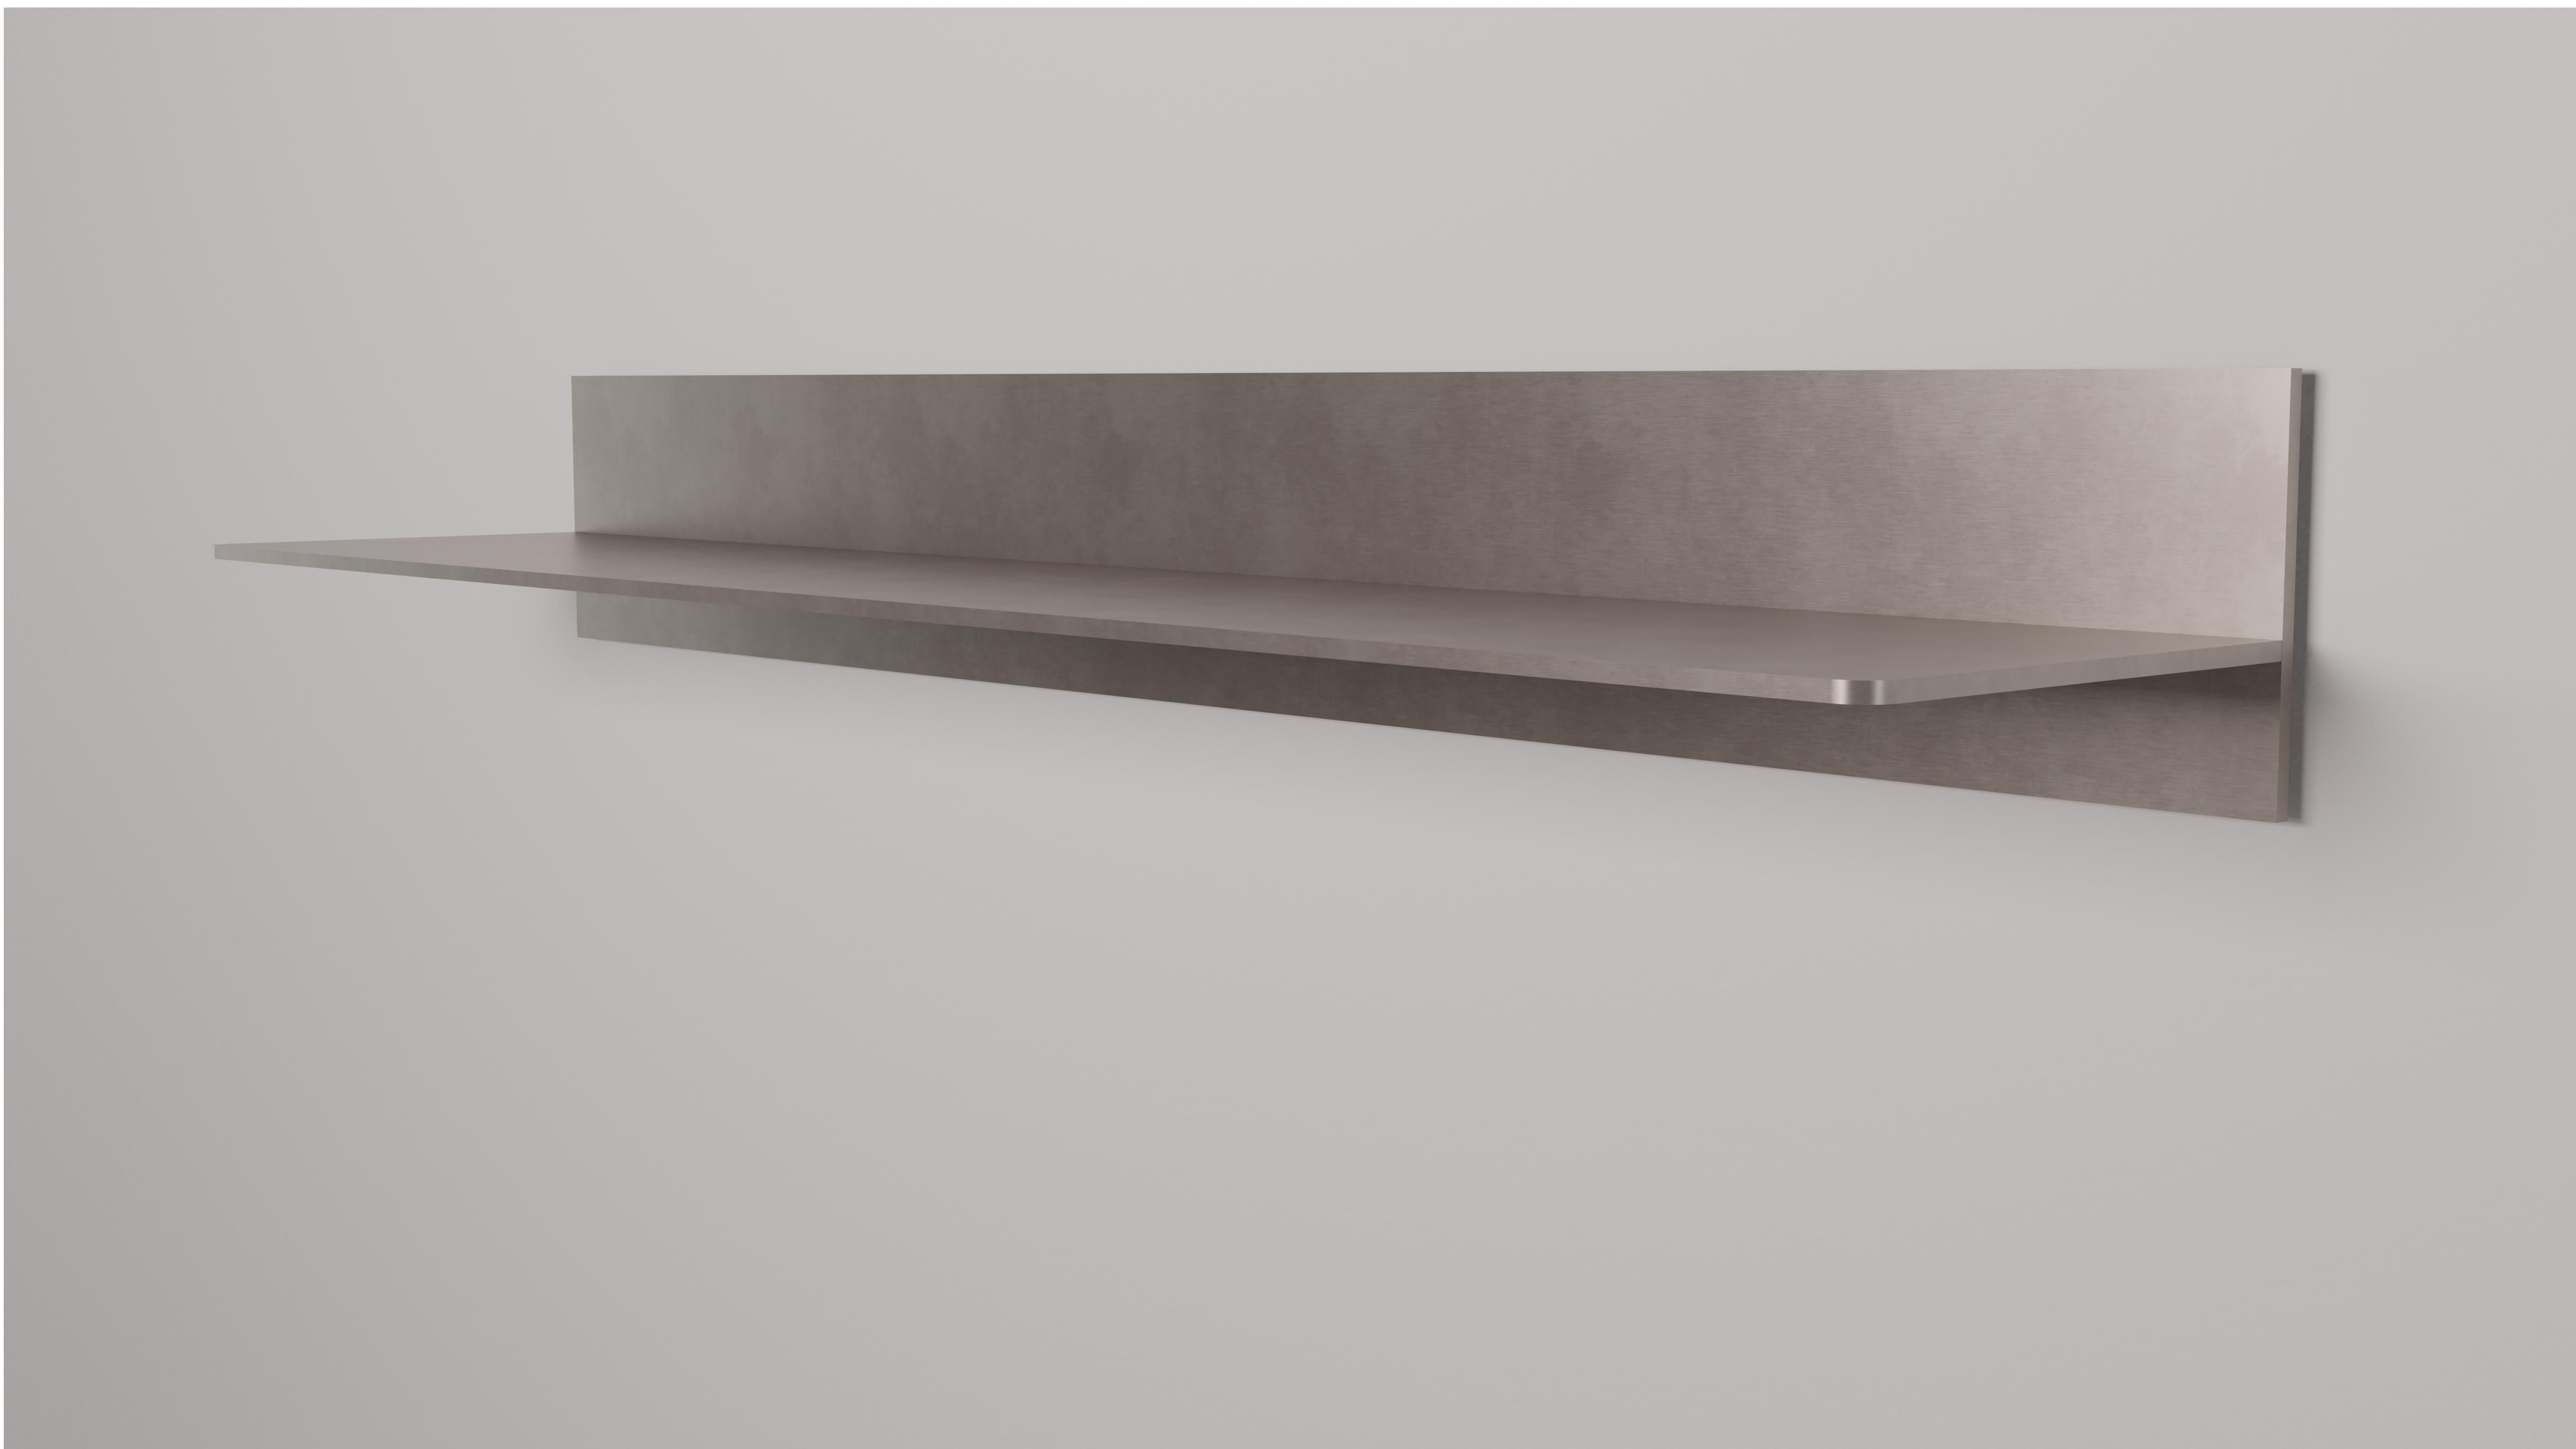 L-wall shelf in half inch thick aluminum plate. Digitally cut aluminum plates intersect and are fused with recessed welds that are ground smooth. Plates are hand finished and waxed. Included are custom, steel wall cleats with instructions for simple